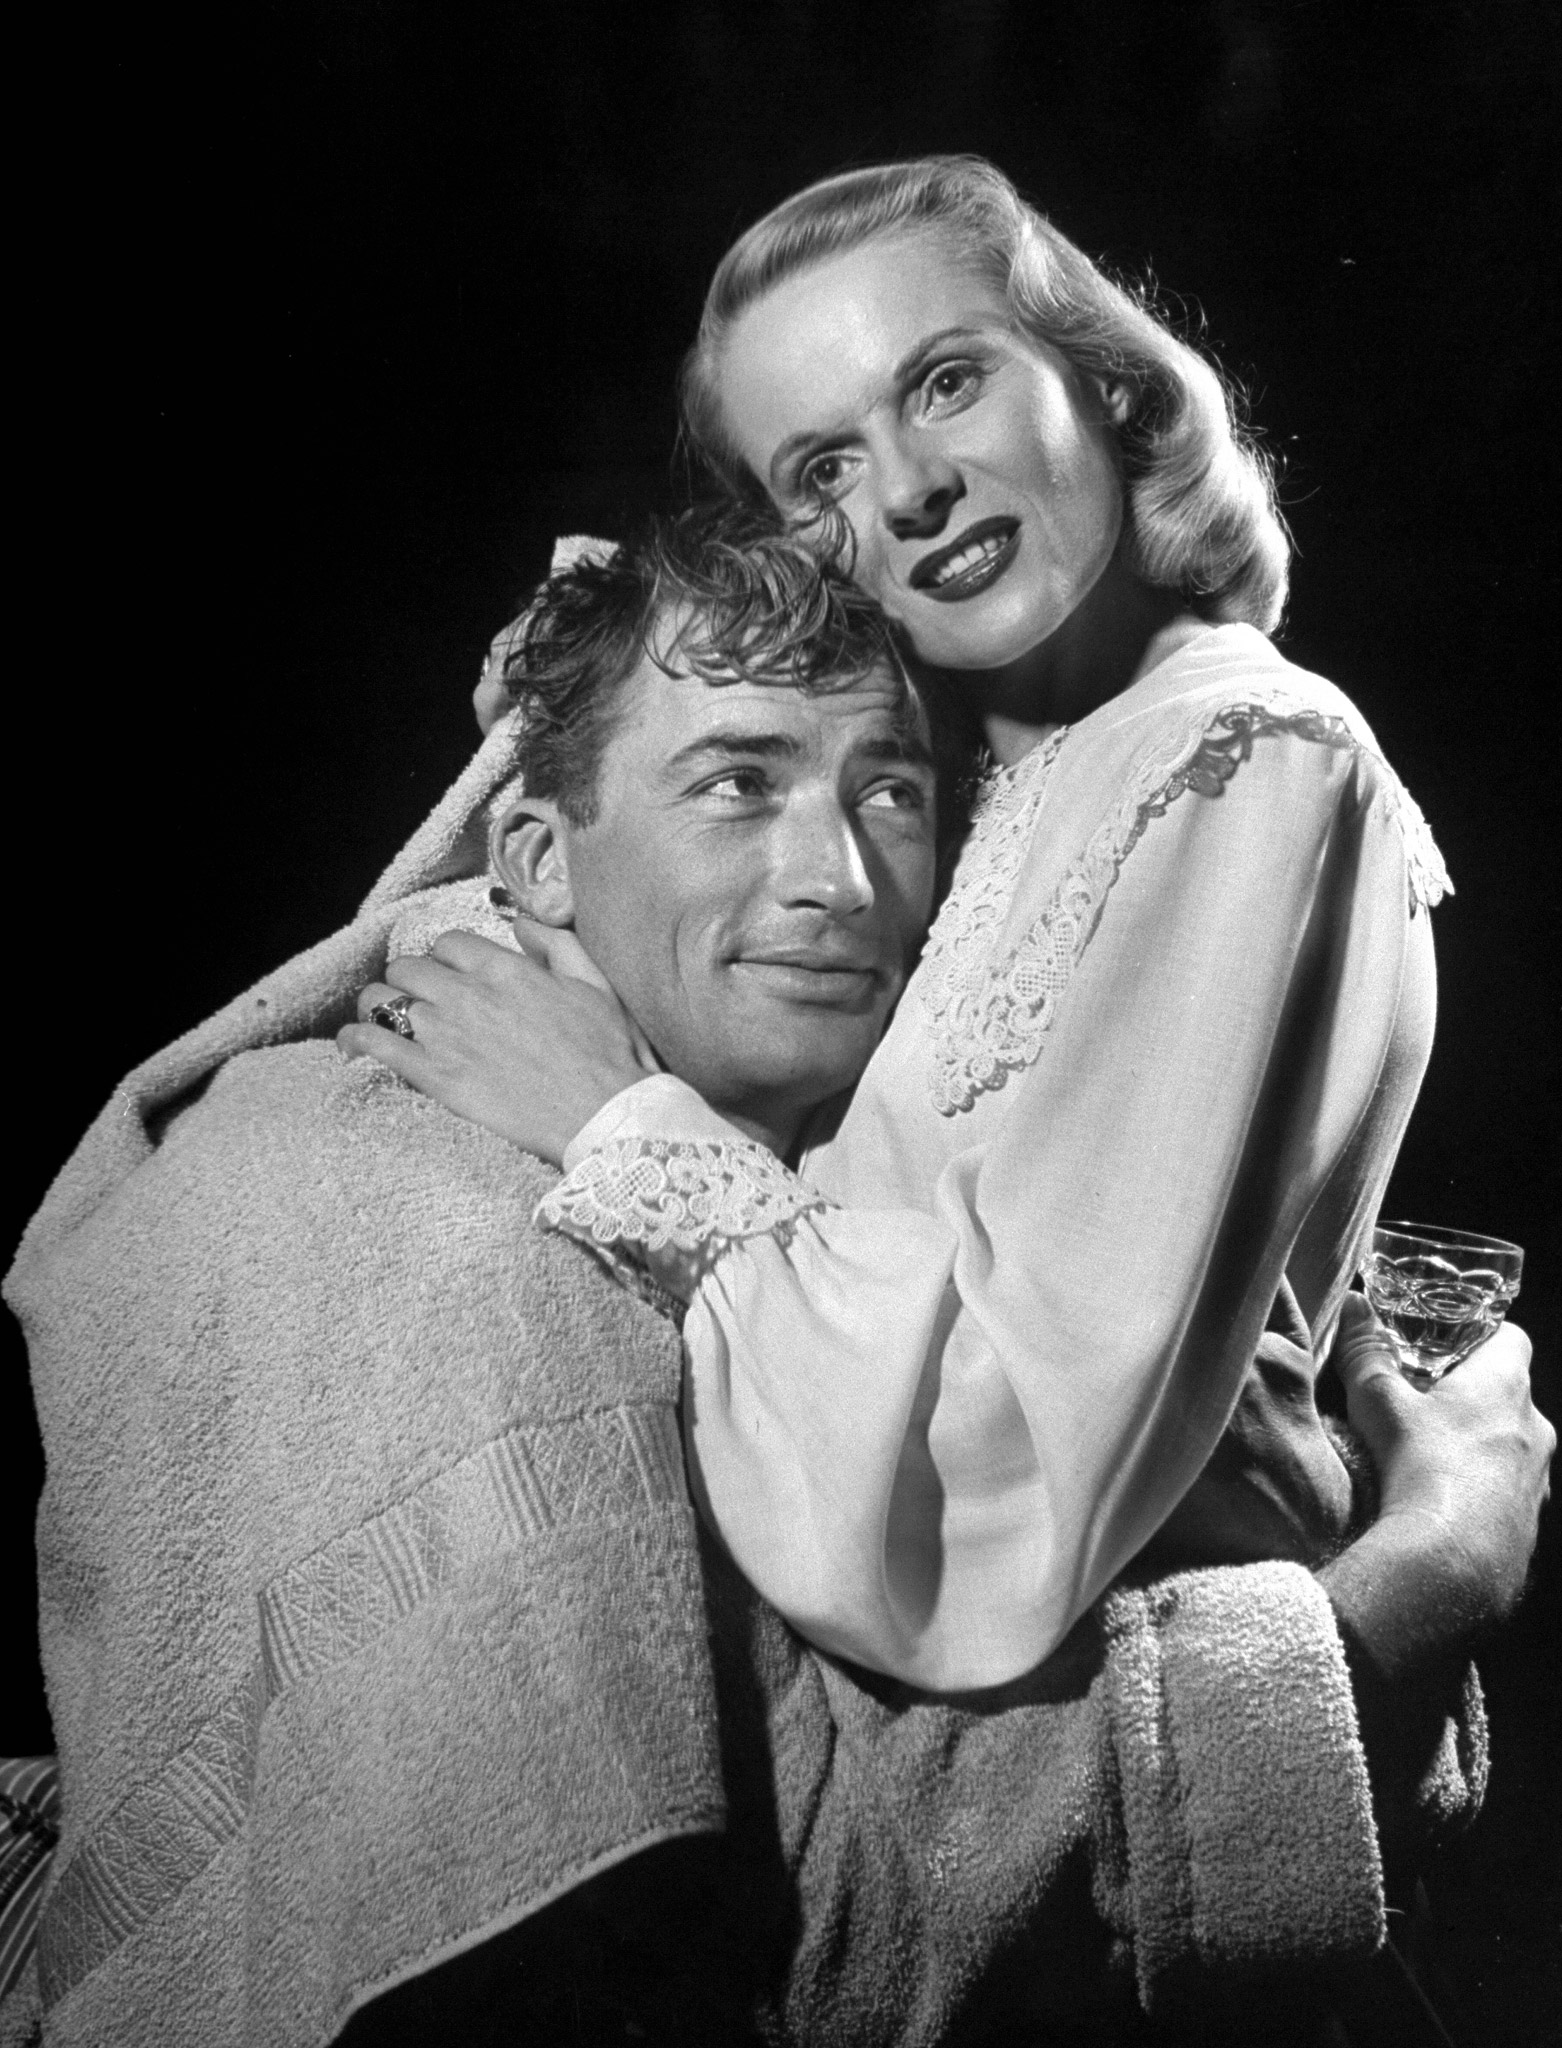 Gregory Peck and Ann Todd, starring in Alfred Hitchcock's film The Paradine Case. 1947.